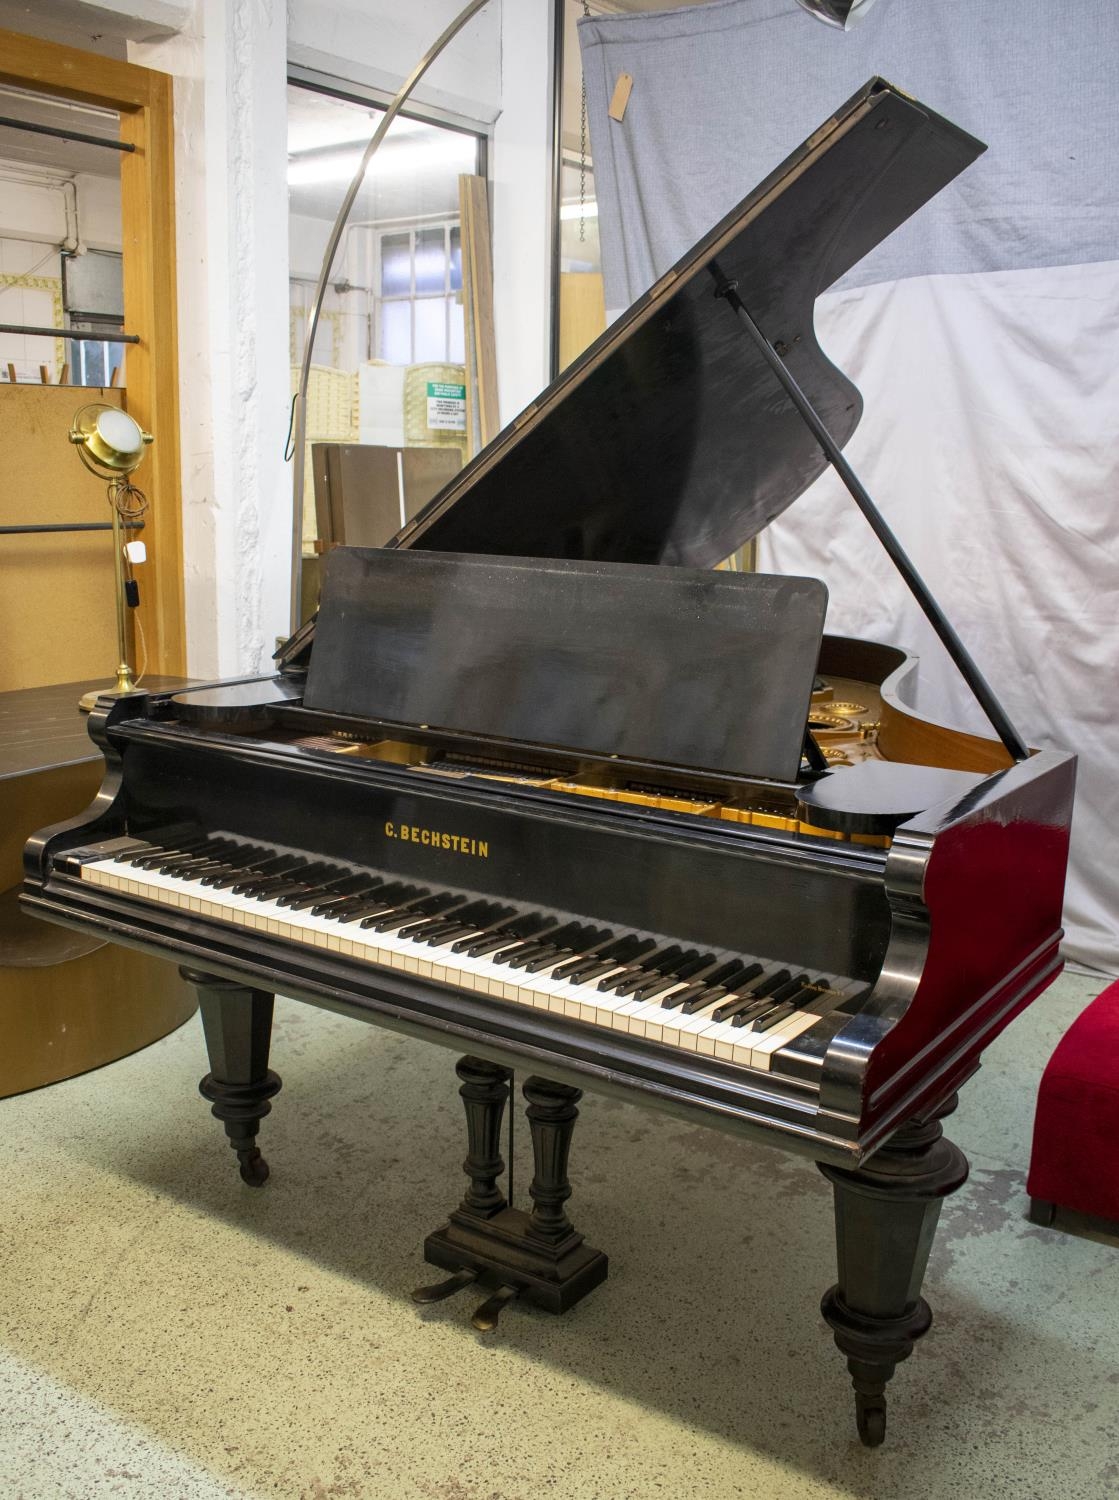 BECHSTIEN GRAND PIANO, 203cm D x 150cm W, late 19th century ebonised.